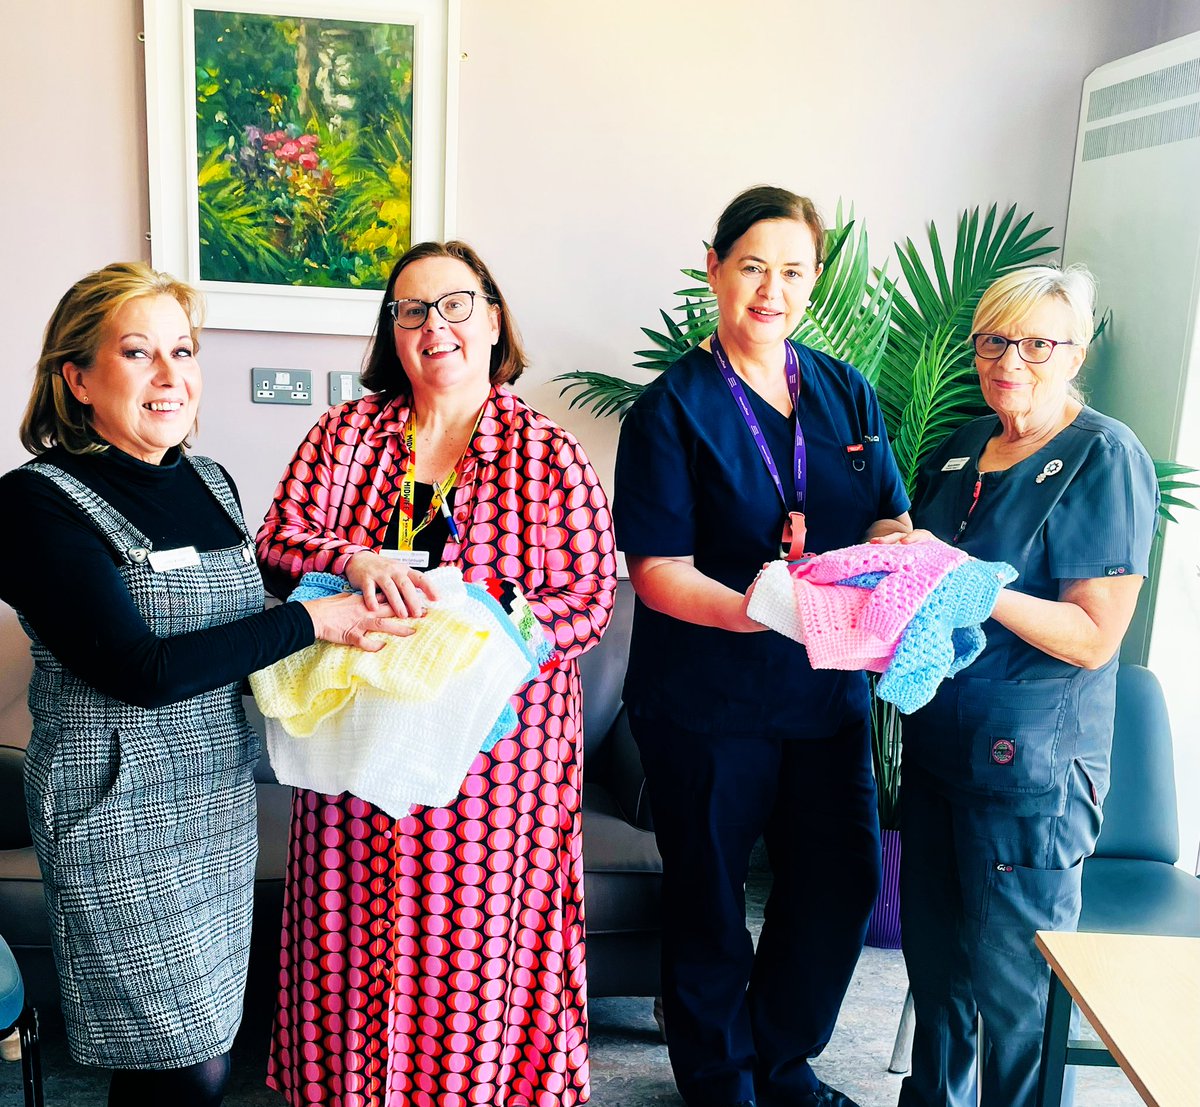 Gifting knits to the NICU @OLOLMat_Unit with love for the comfort and care of the little ones .🦋
#k2tog @NursingOlol @gra_milne12 @NualaRafferty3